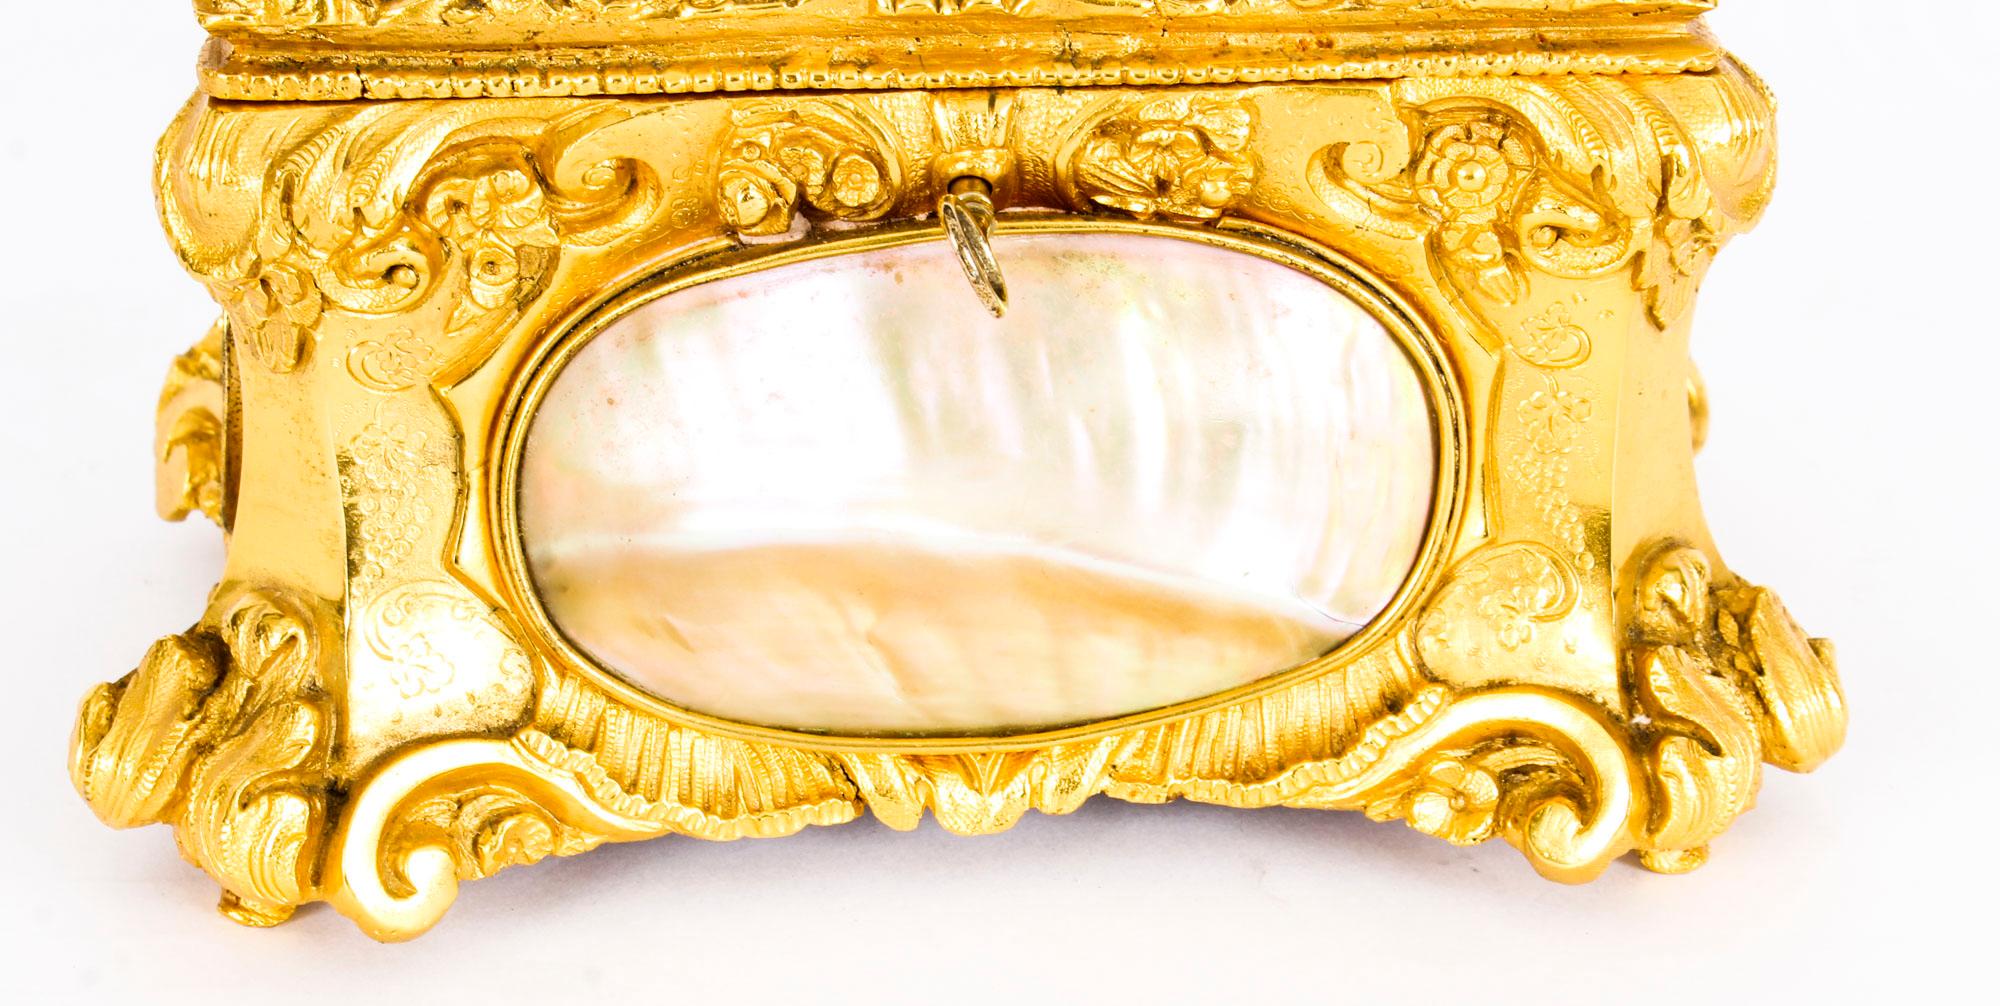 Antique French Ormolu Casket with Abalone Shell Plaques, 19th Century 4